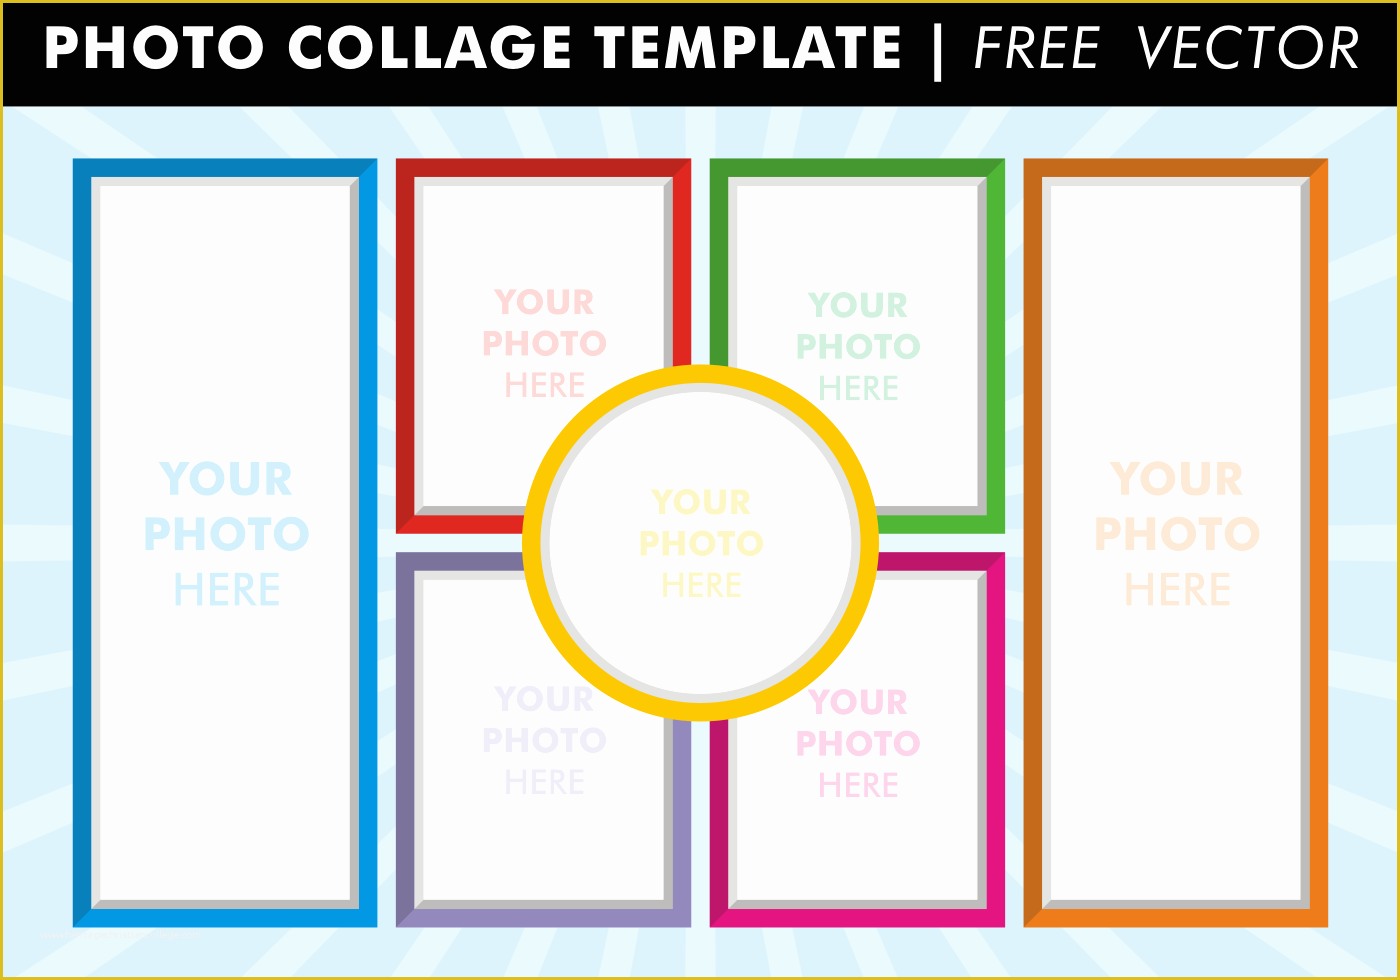 Free Collage Templates Of Collage Templates Vector Download Free Vector Art